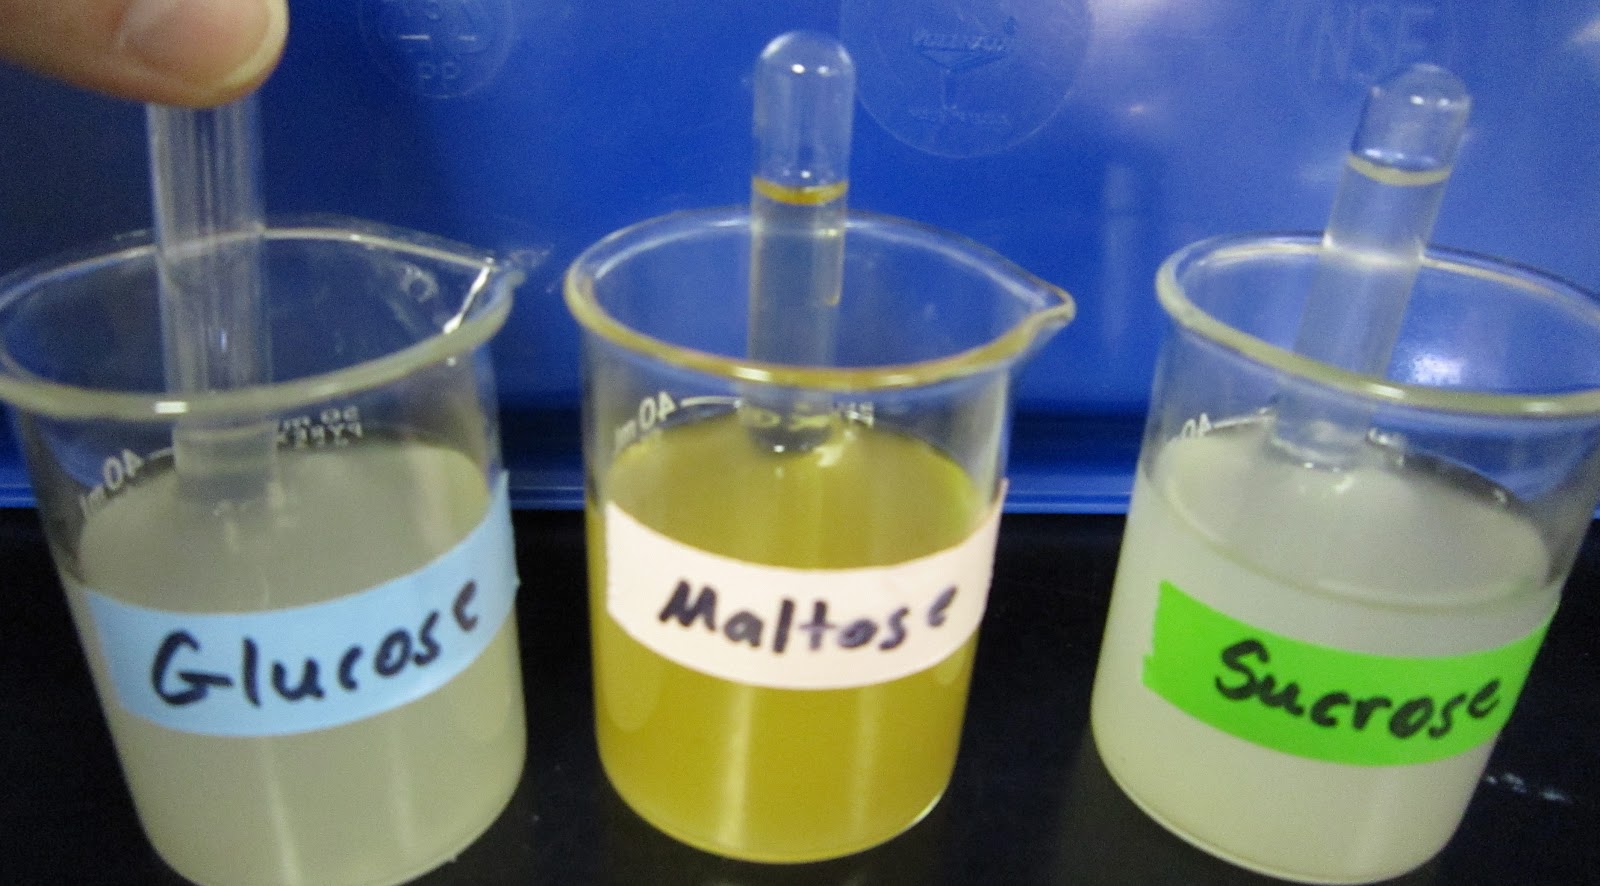 😀 Rate of fermentation of yeast experiment. Chemistry Project on Study ... - Use+of+Glucose+gas+bubbles